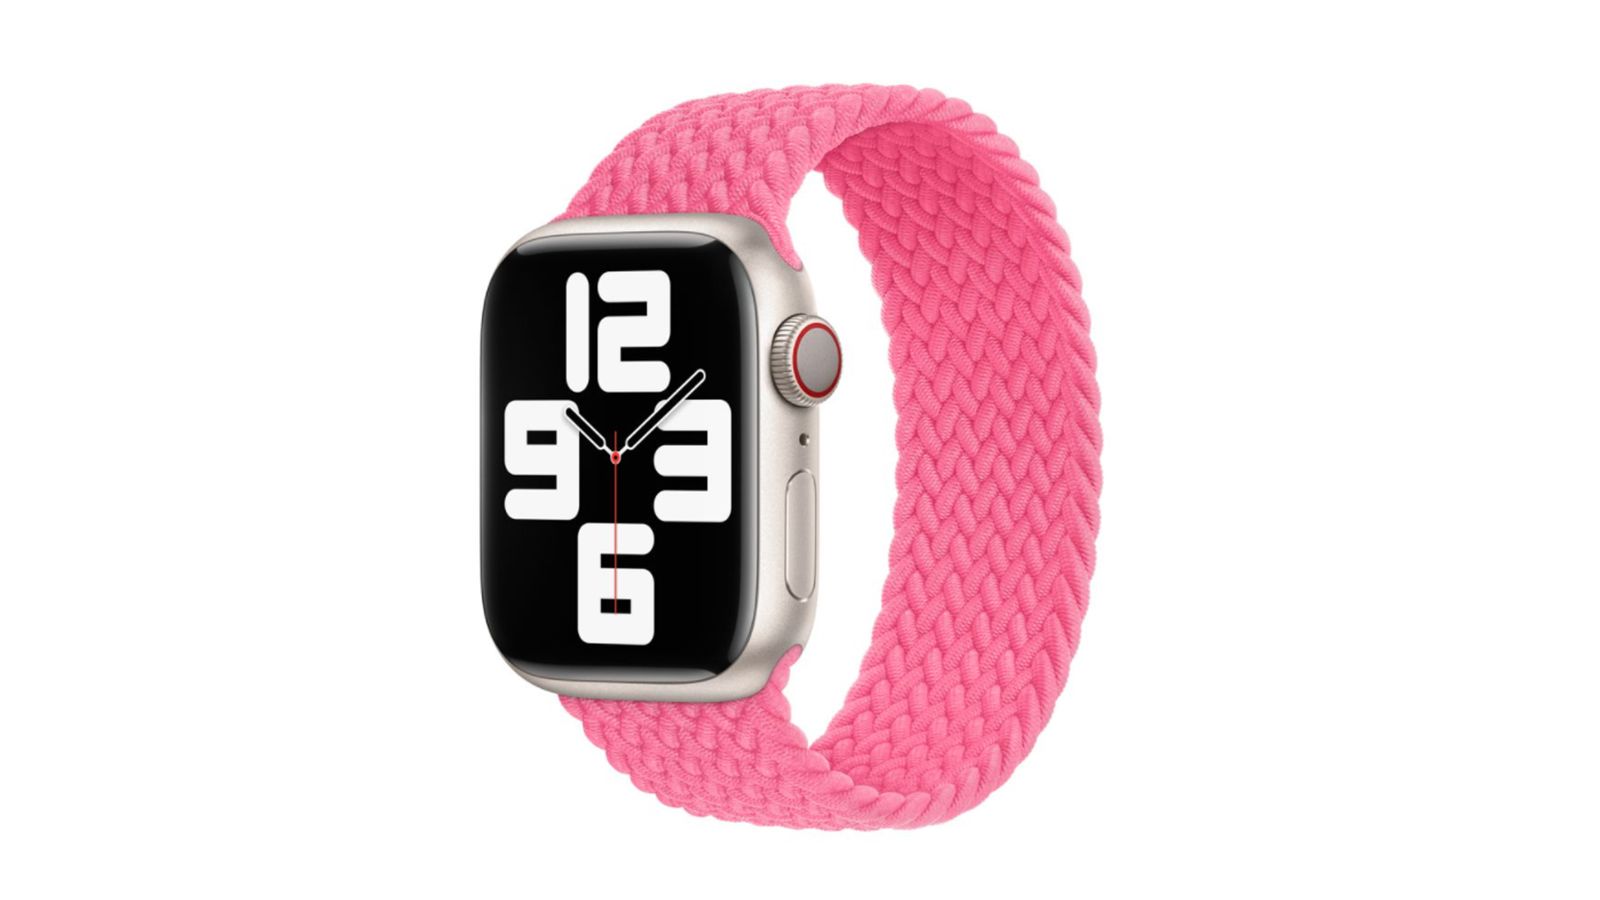 Apple's Spring 2022 colors for watch bands and cases